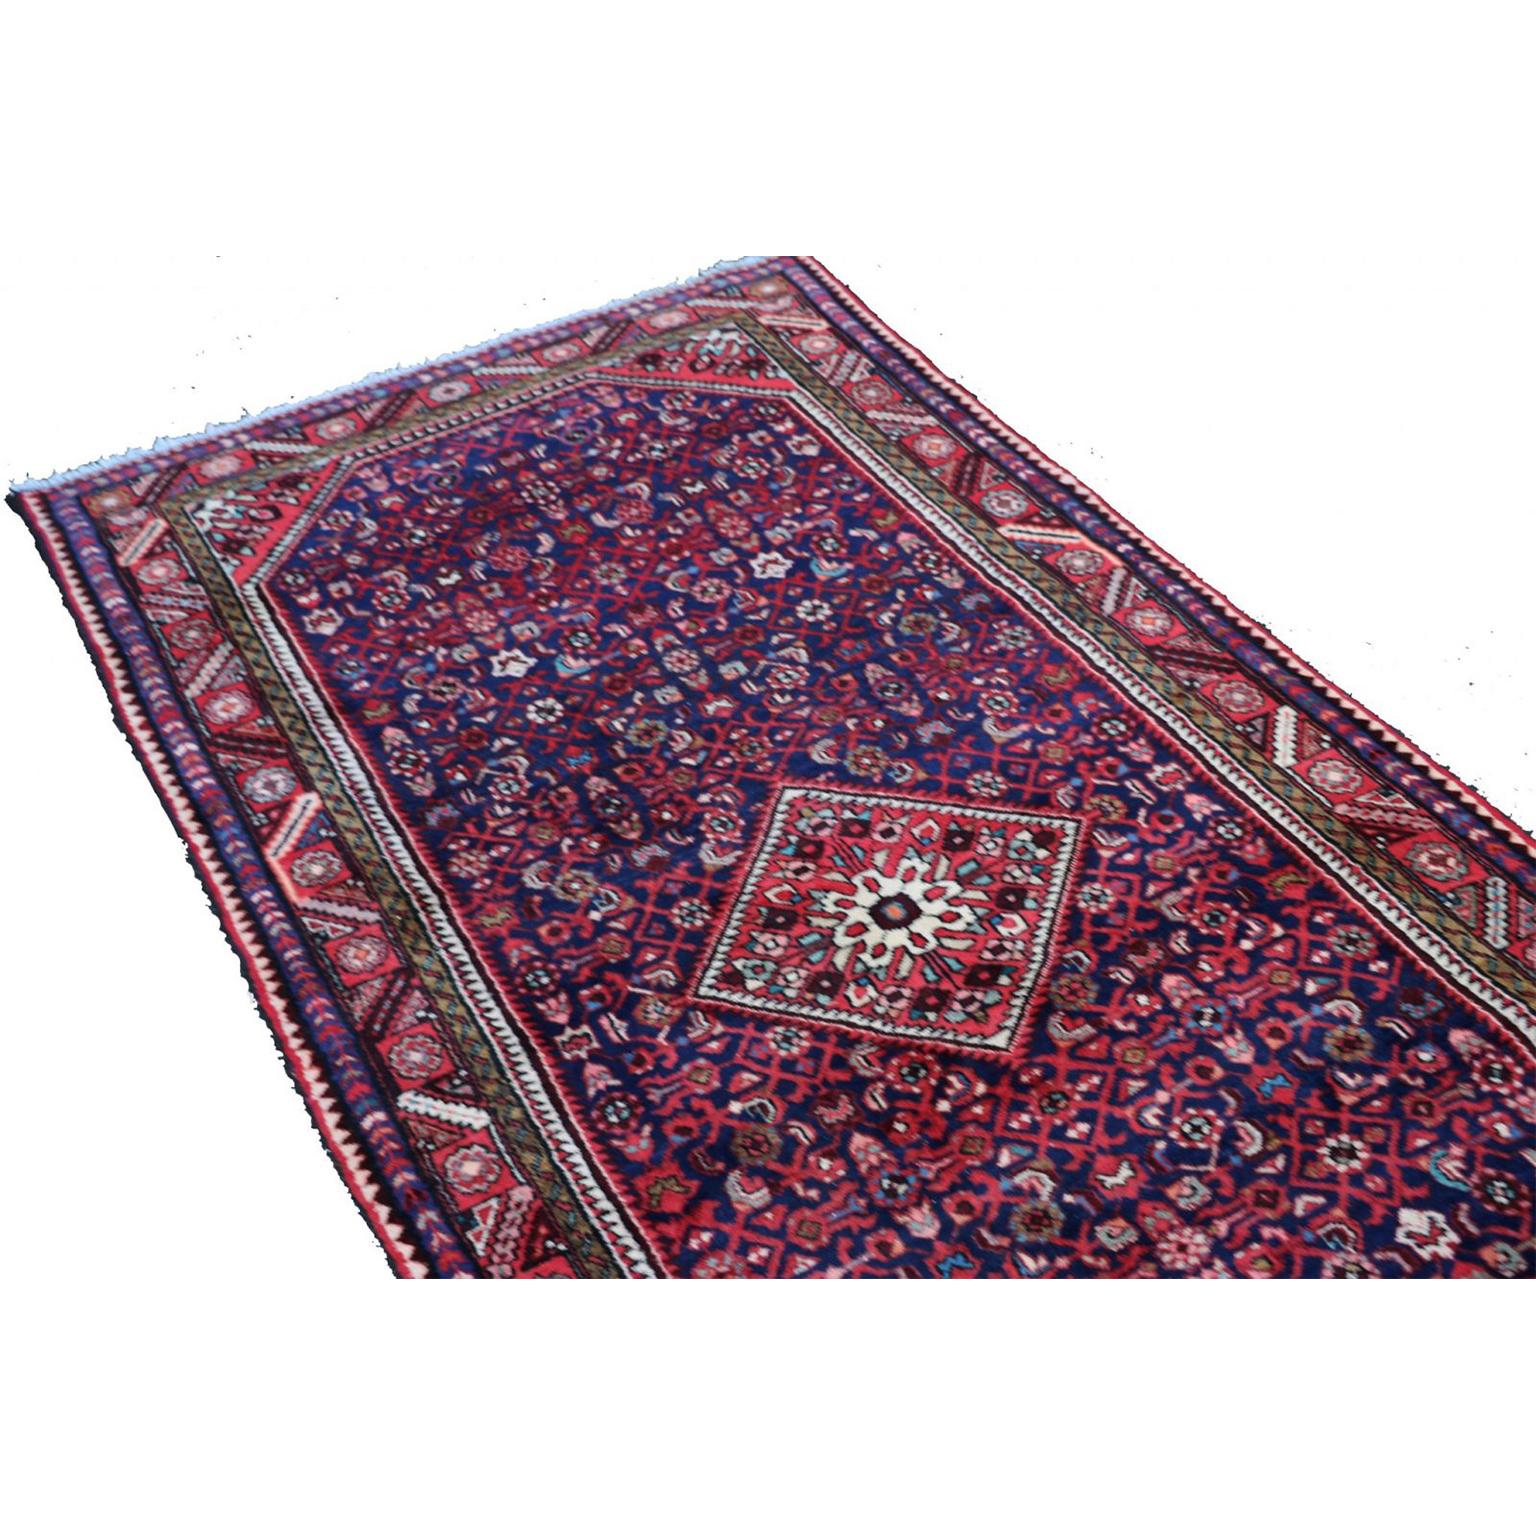 A hand knotted wool Hamadan rug, North West Persia, wool on cotton foundation. The blue field with a central diamond lozenge floral medallion supported by all-over “Herati”, within a red paneled flower head and alternating stepped leaf